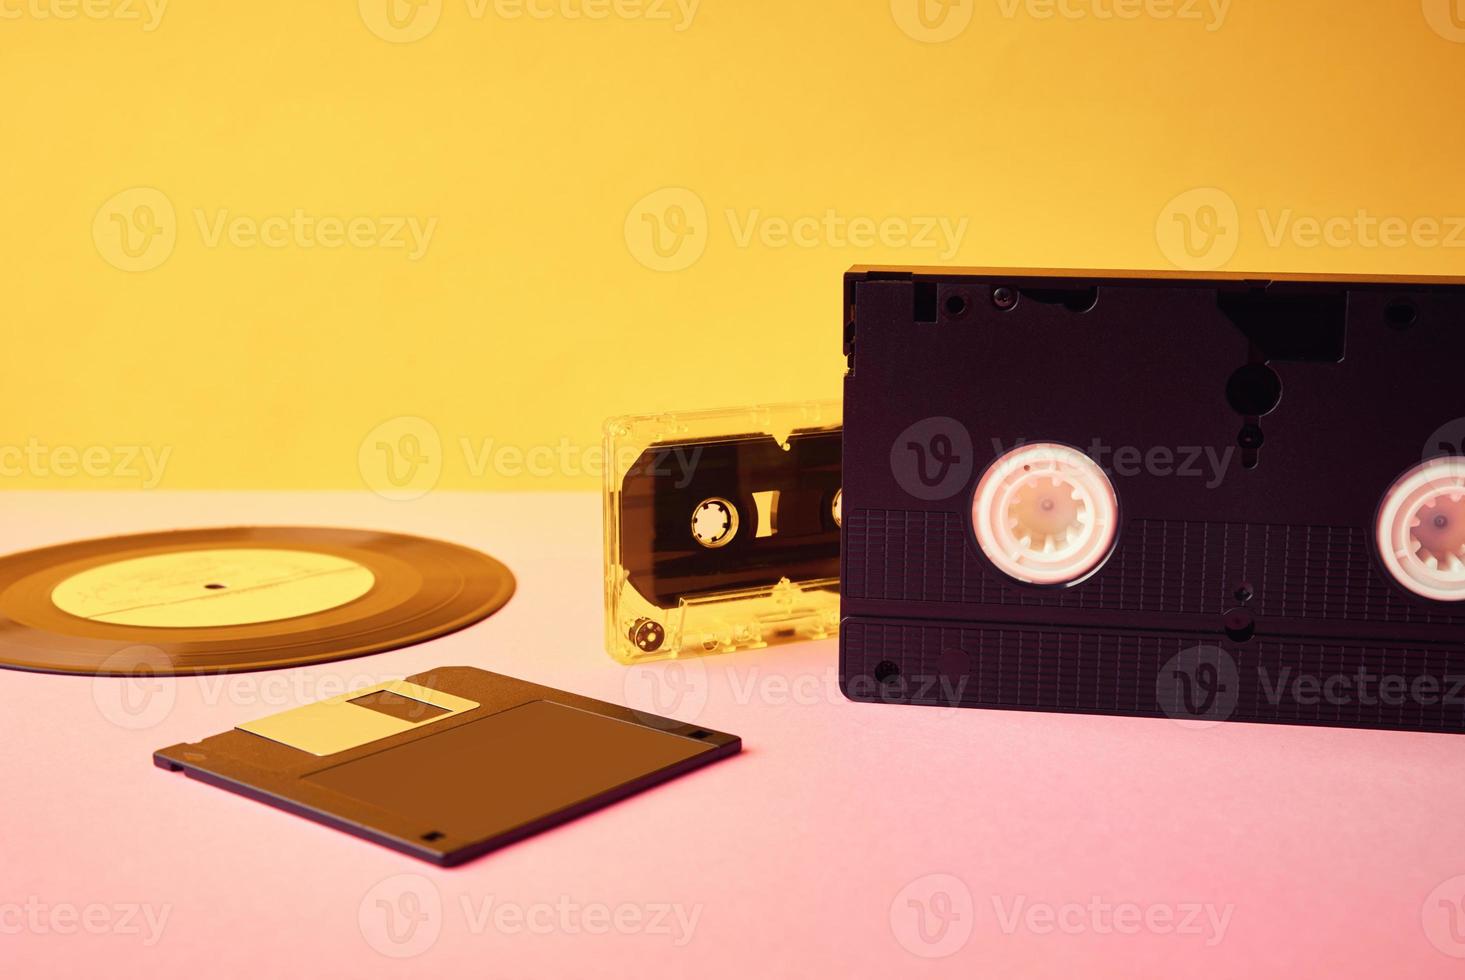 Vinyl disc, floppy diskette, vhs and tape cassete on yellow background photo